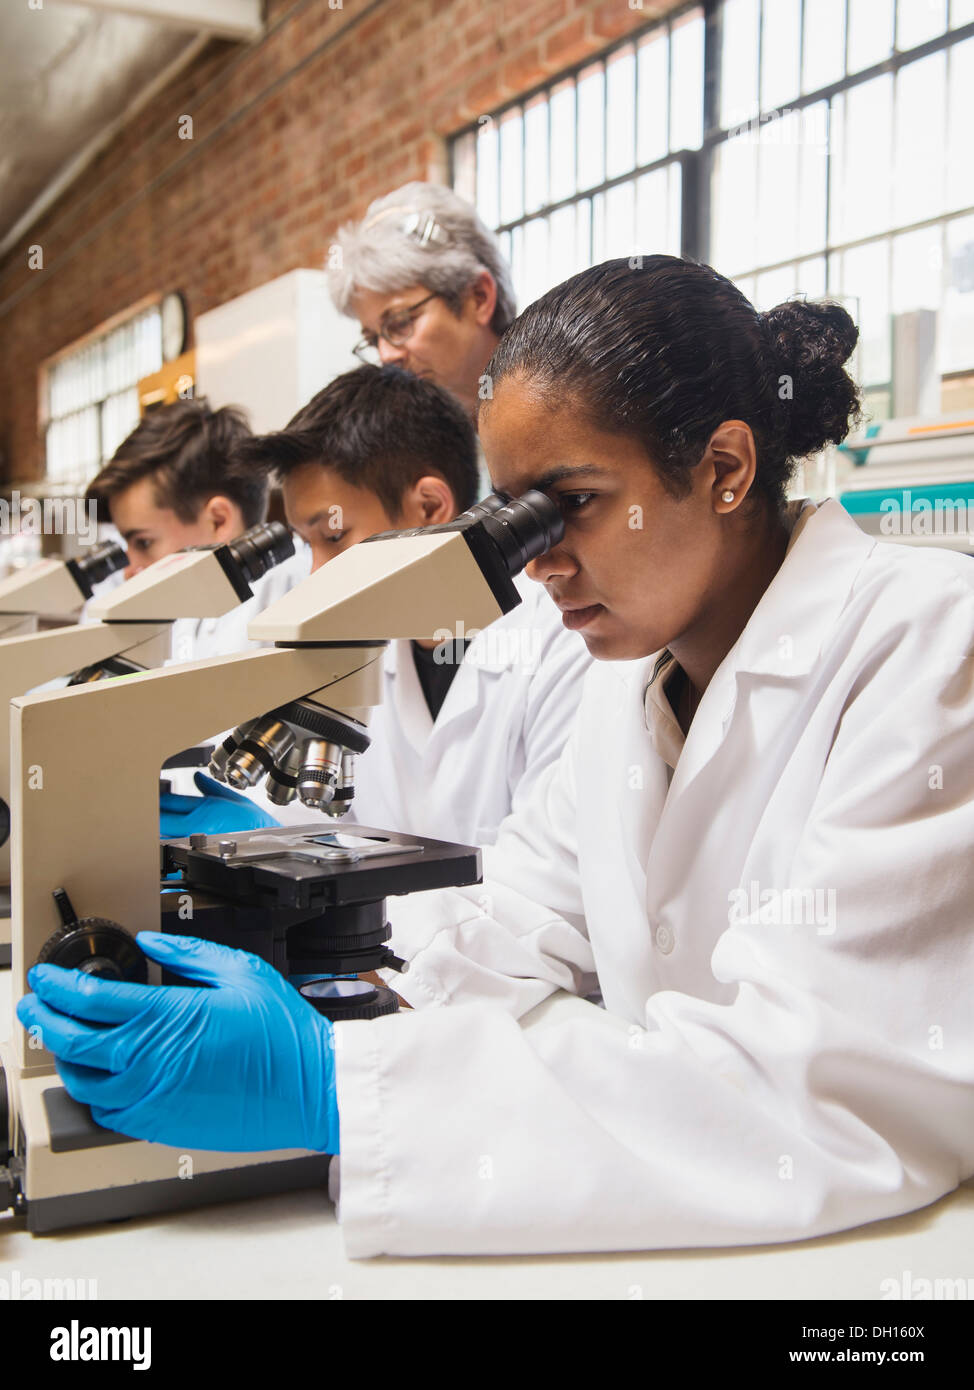 Students working in science lab Stock Photo